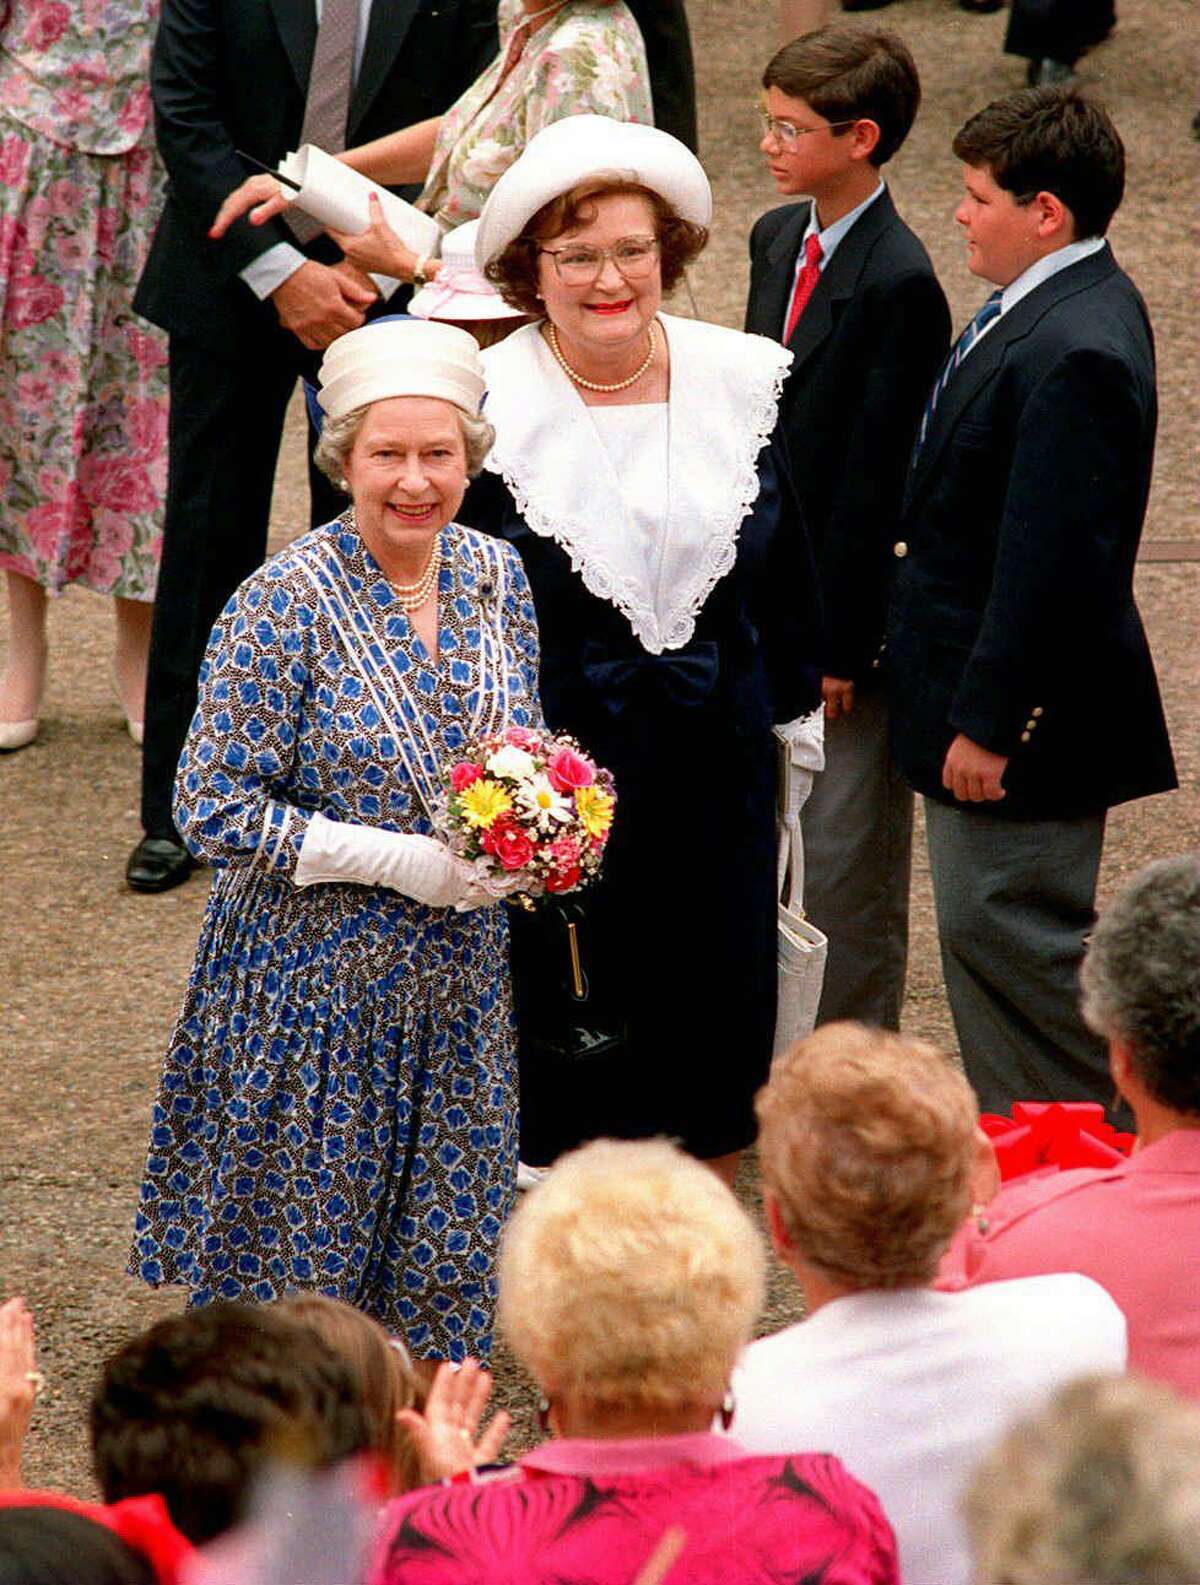 Queen Elizabeth II, foreground, and Mayor Lila Cockrell greet the crowd during the queen’s visit to San Antonio in May 1991.